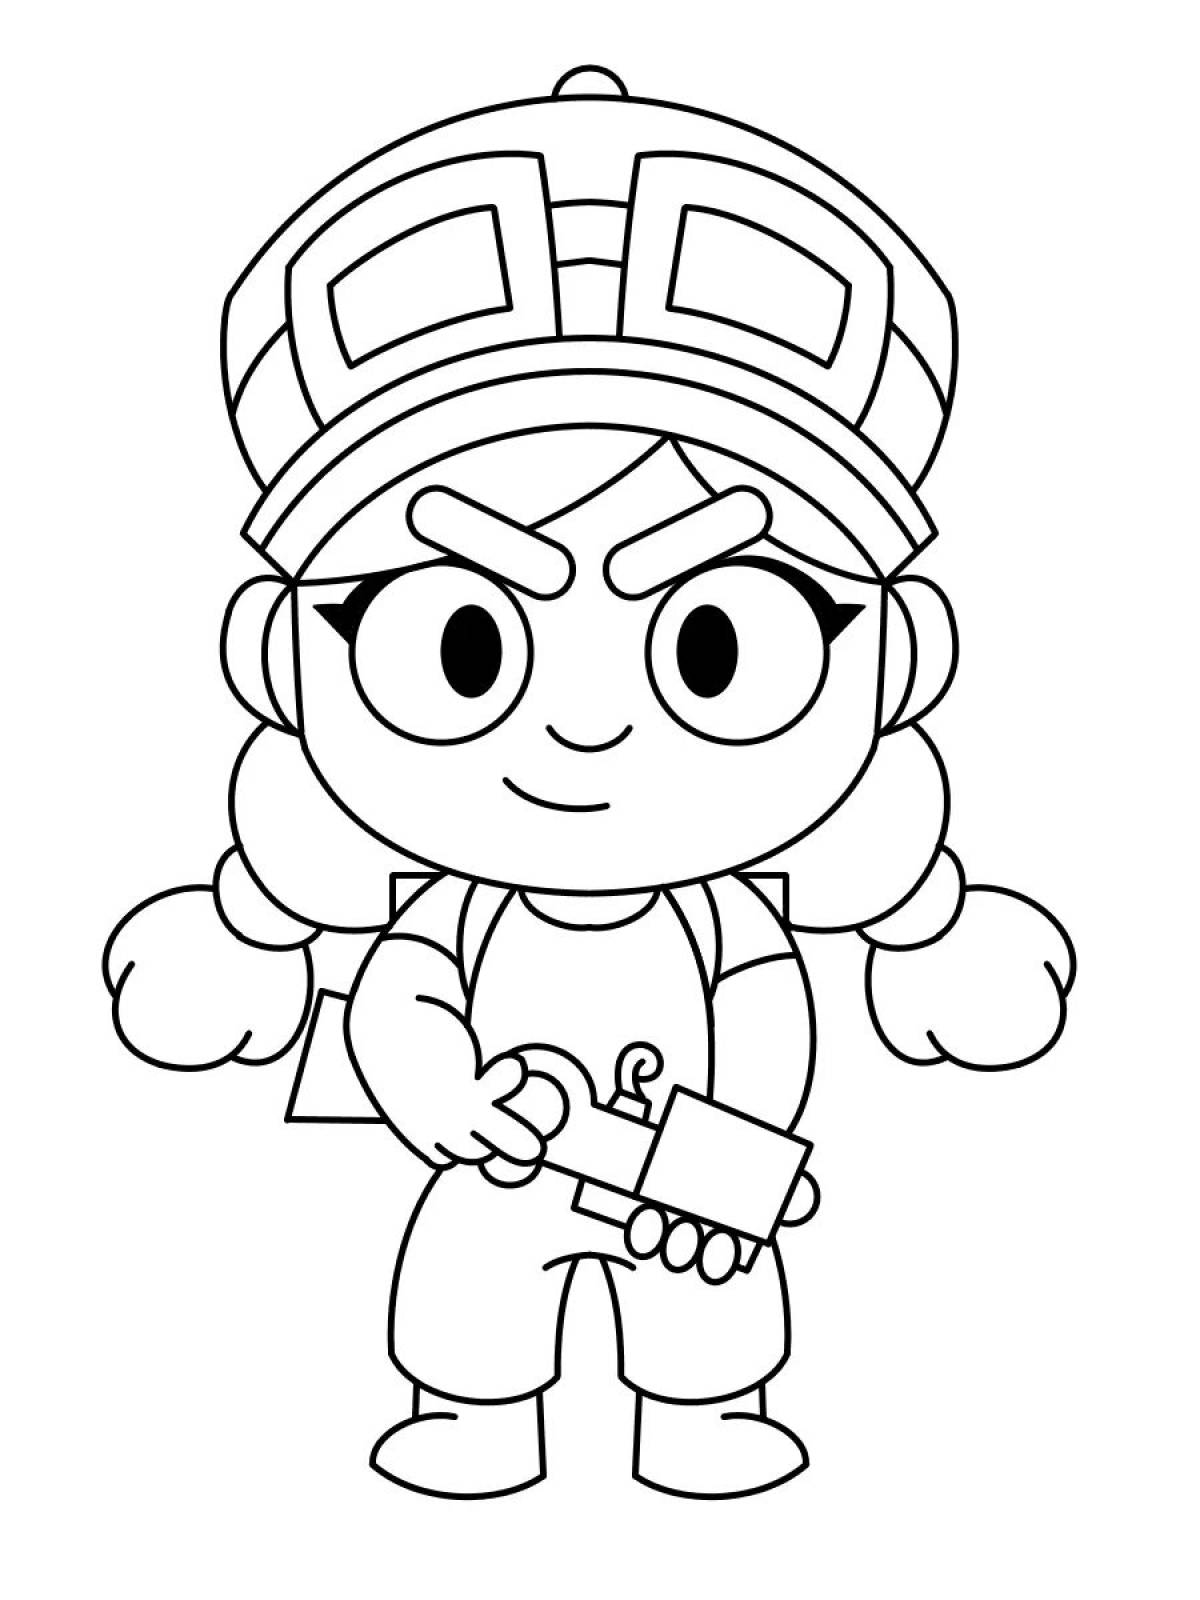 Shelly's outstanding brawl stars coloring page